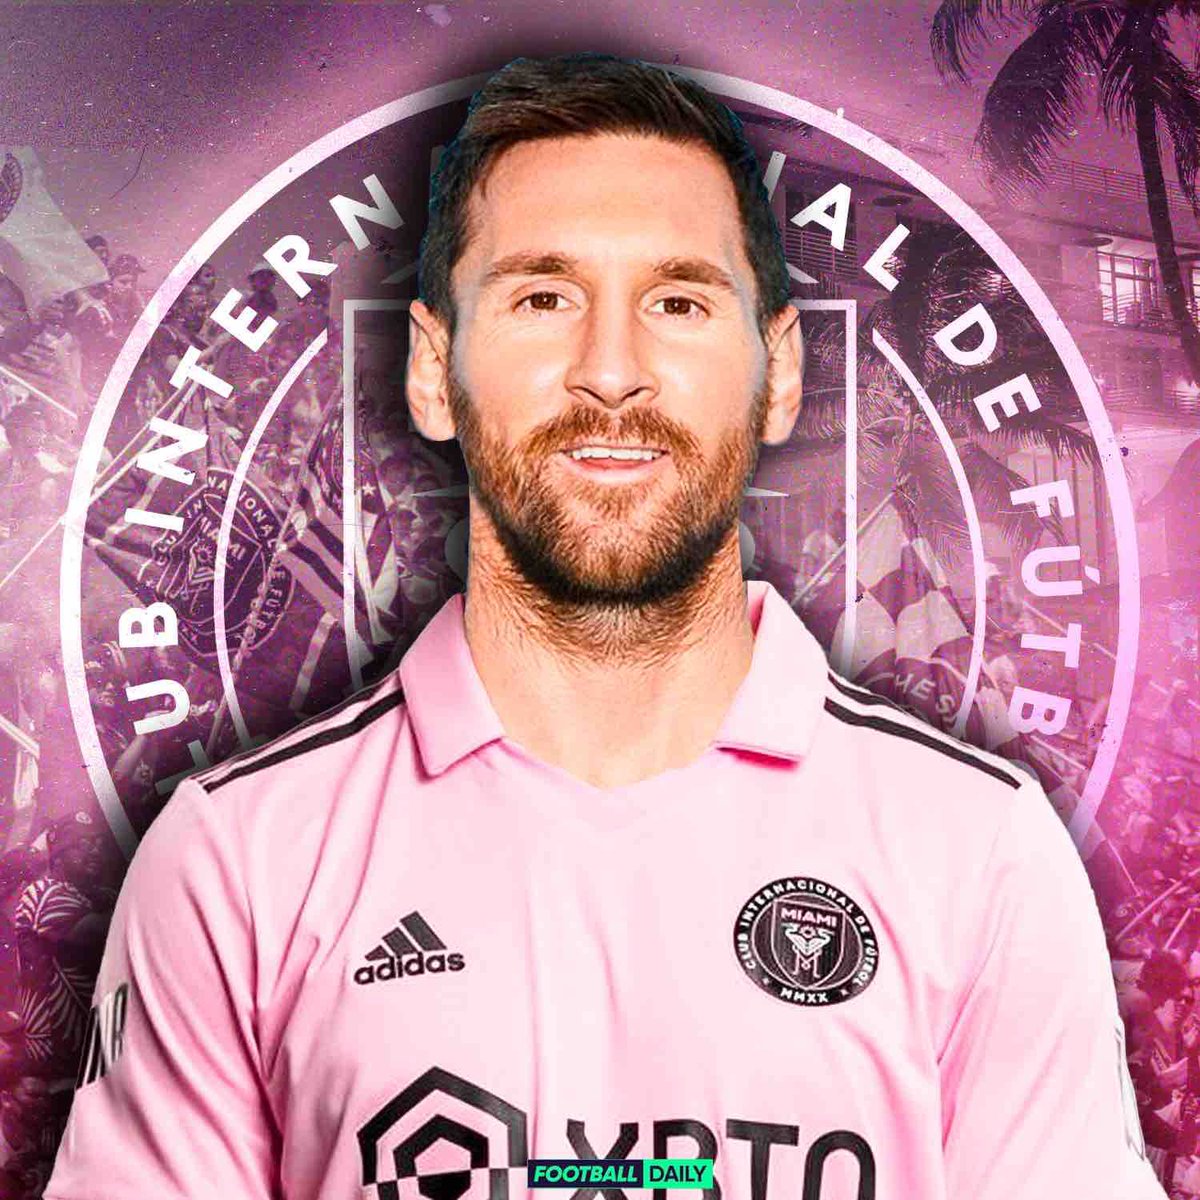 Welcome to @InterMiamiCF and the @MLS, Lionel Messi 🇦🇷!! What a winning combination with David Beckham 🇬🇧, we can't wait to witness the magic. #BienvenidoaMiami, Leo!

#Messi #WelcometoMiami